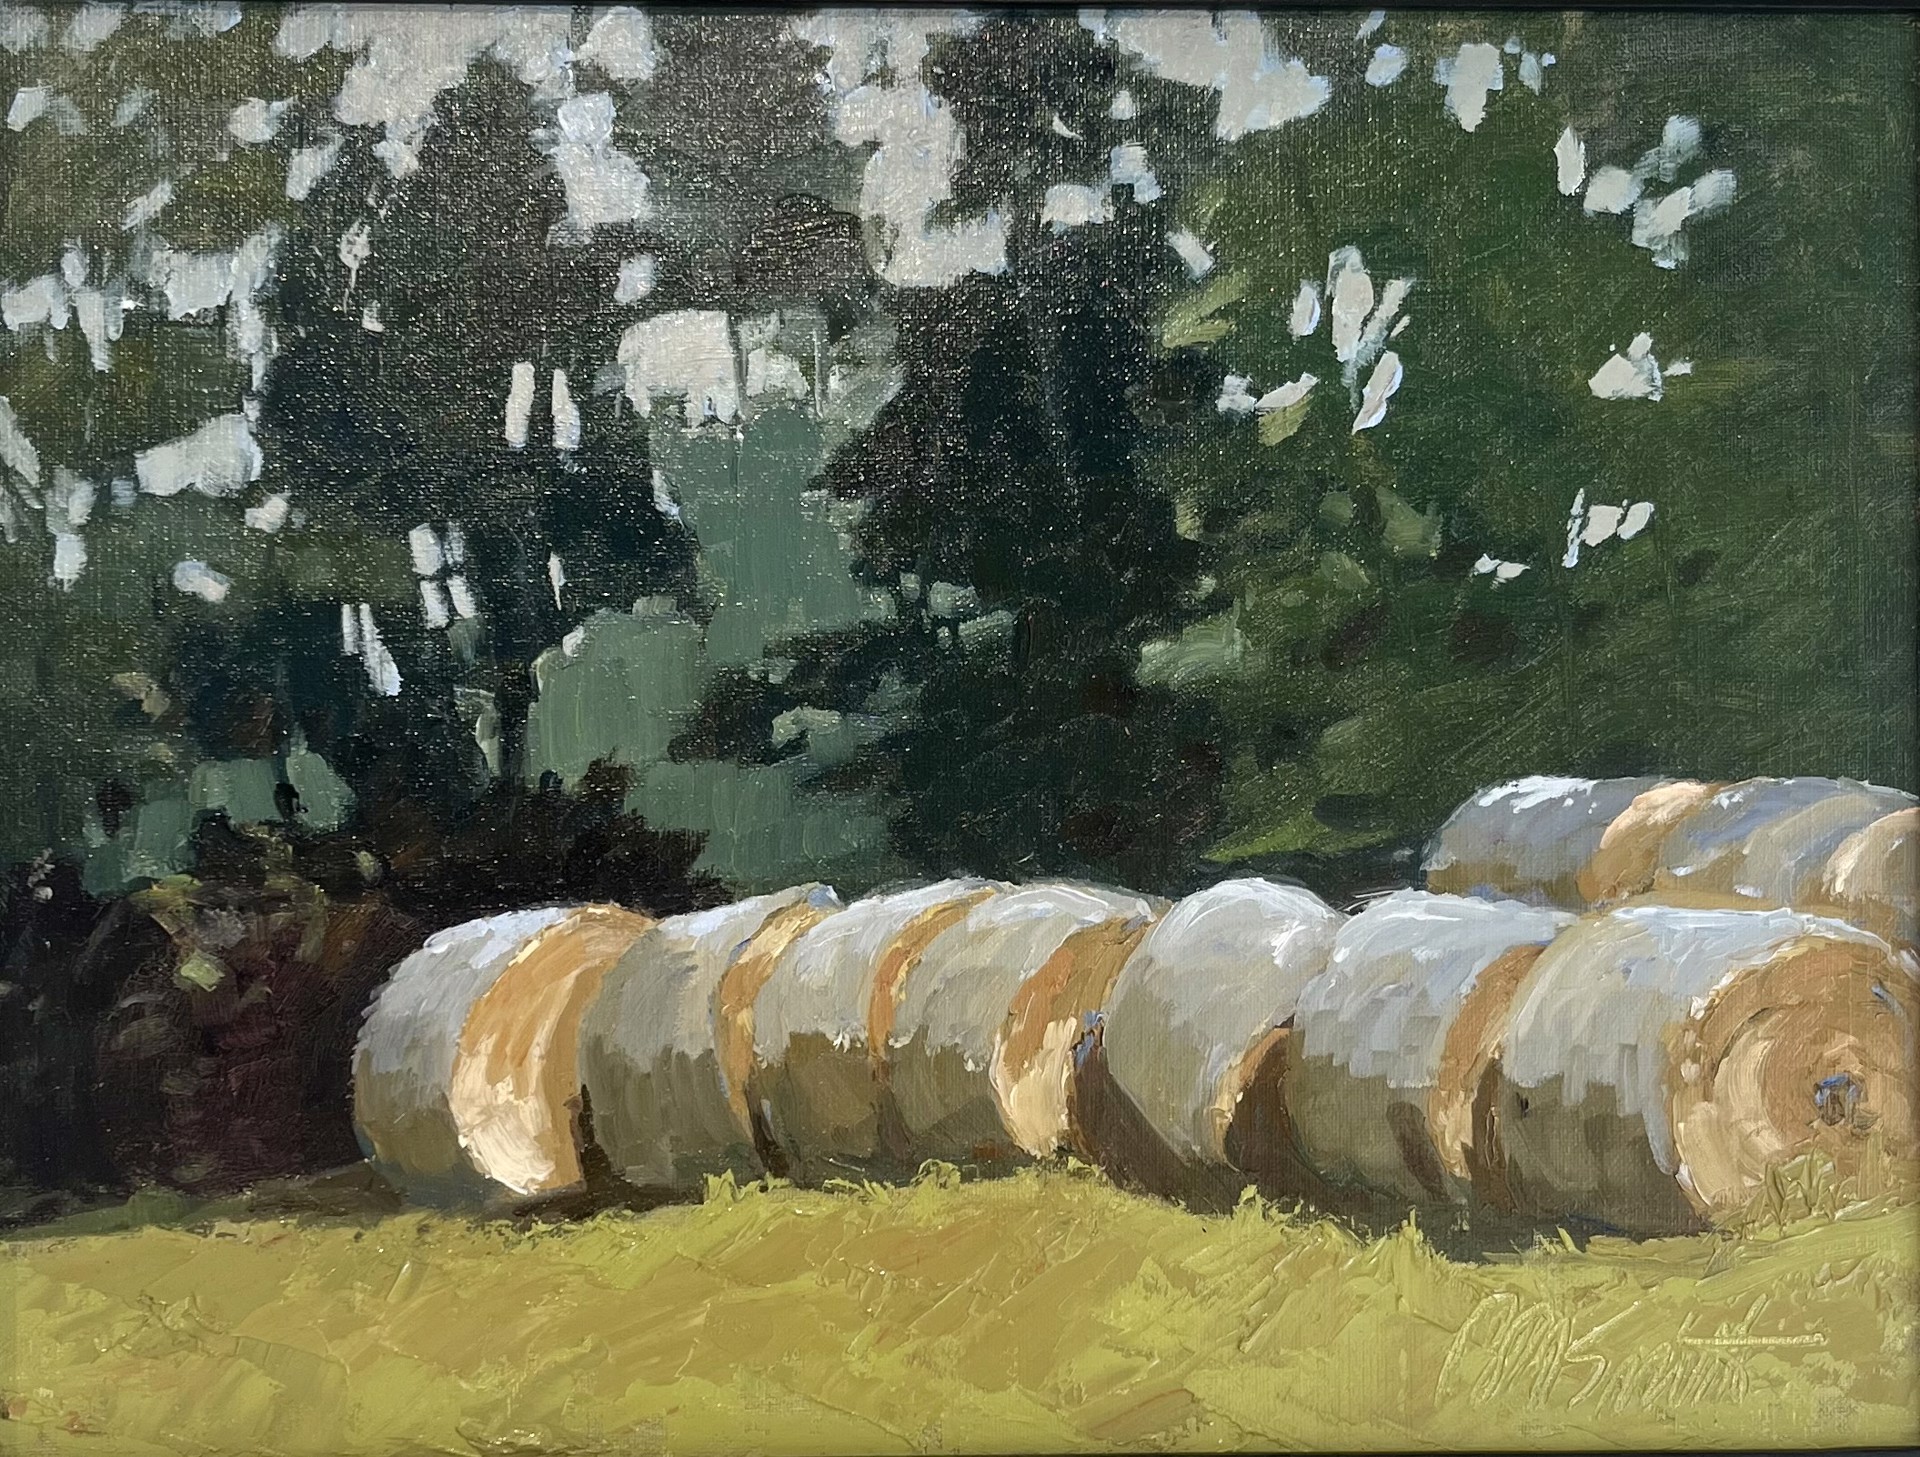 Bales by Brian M. Smith